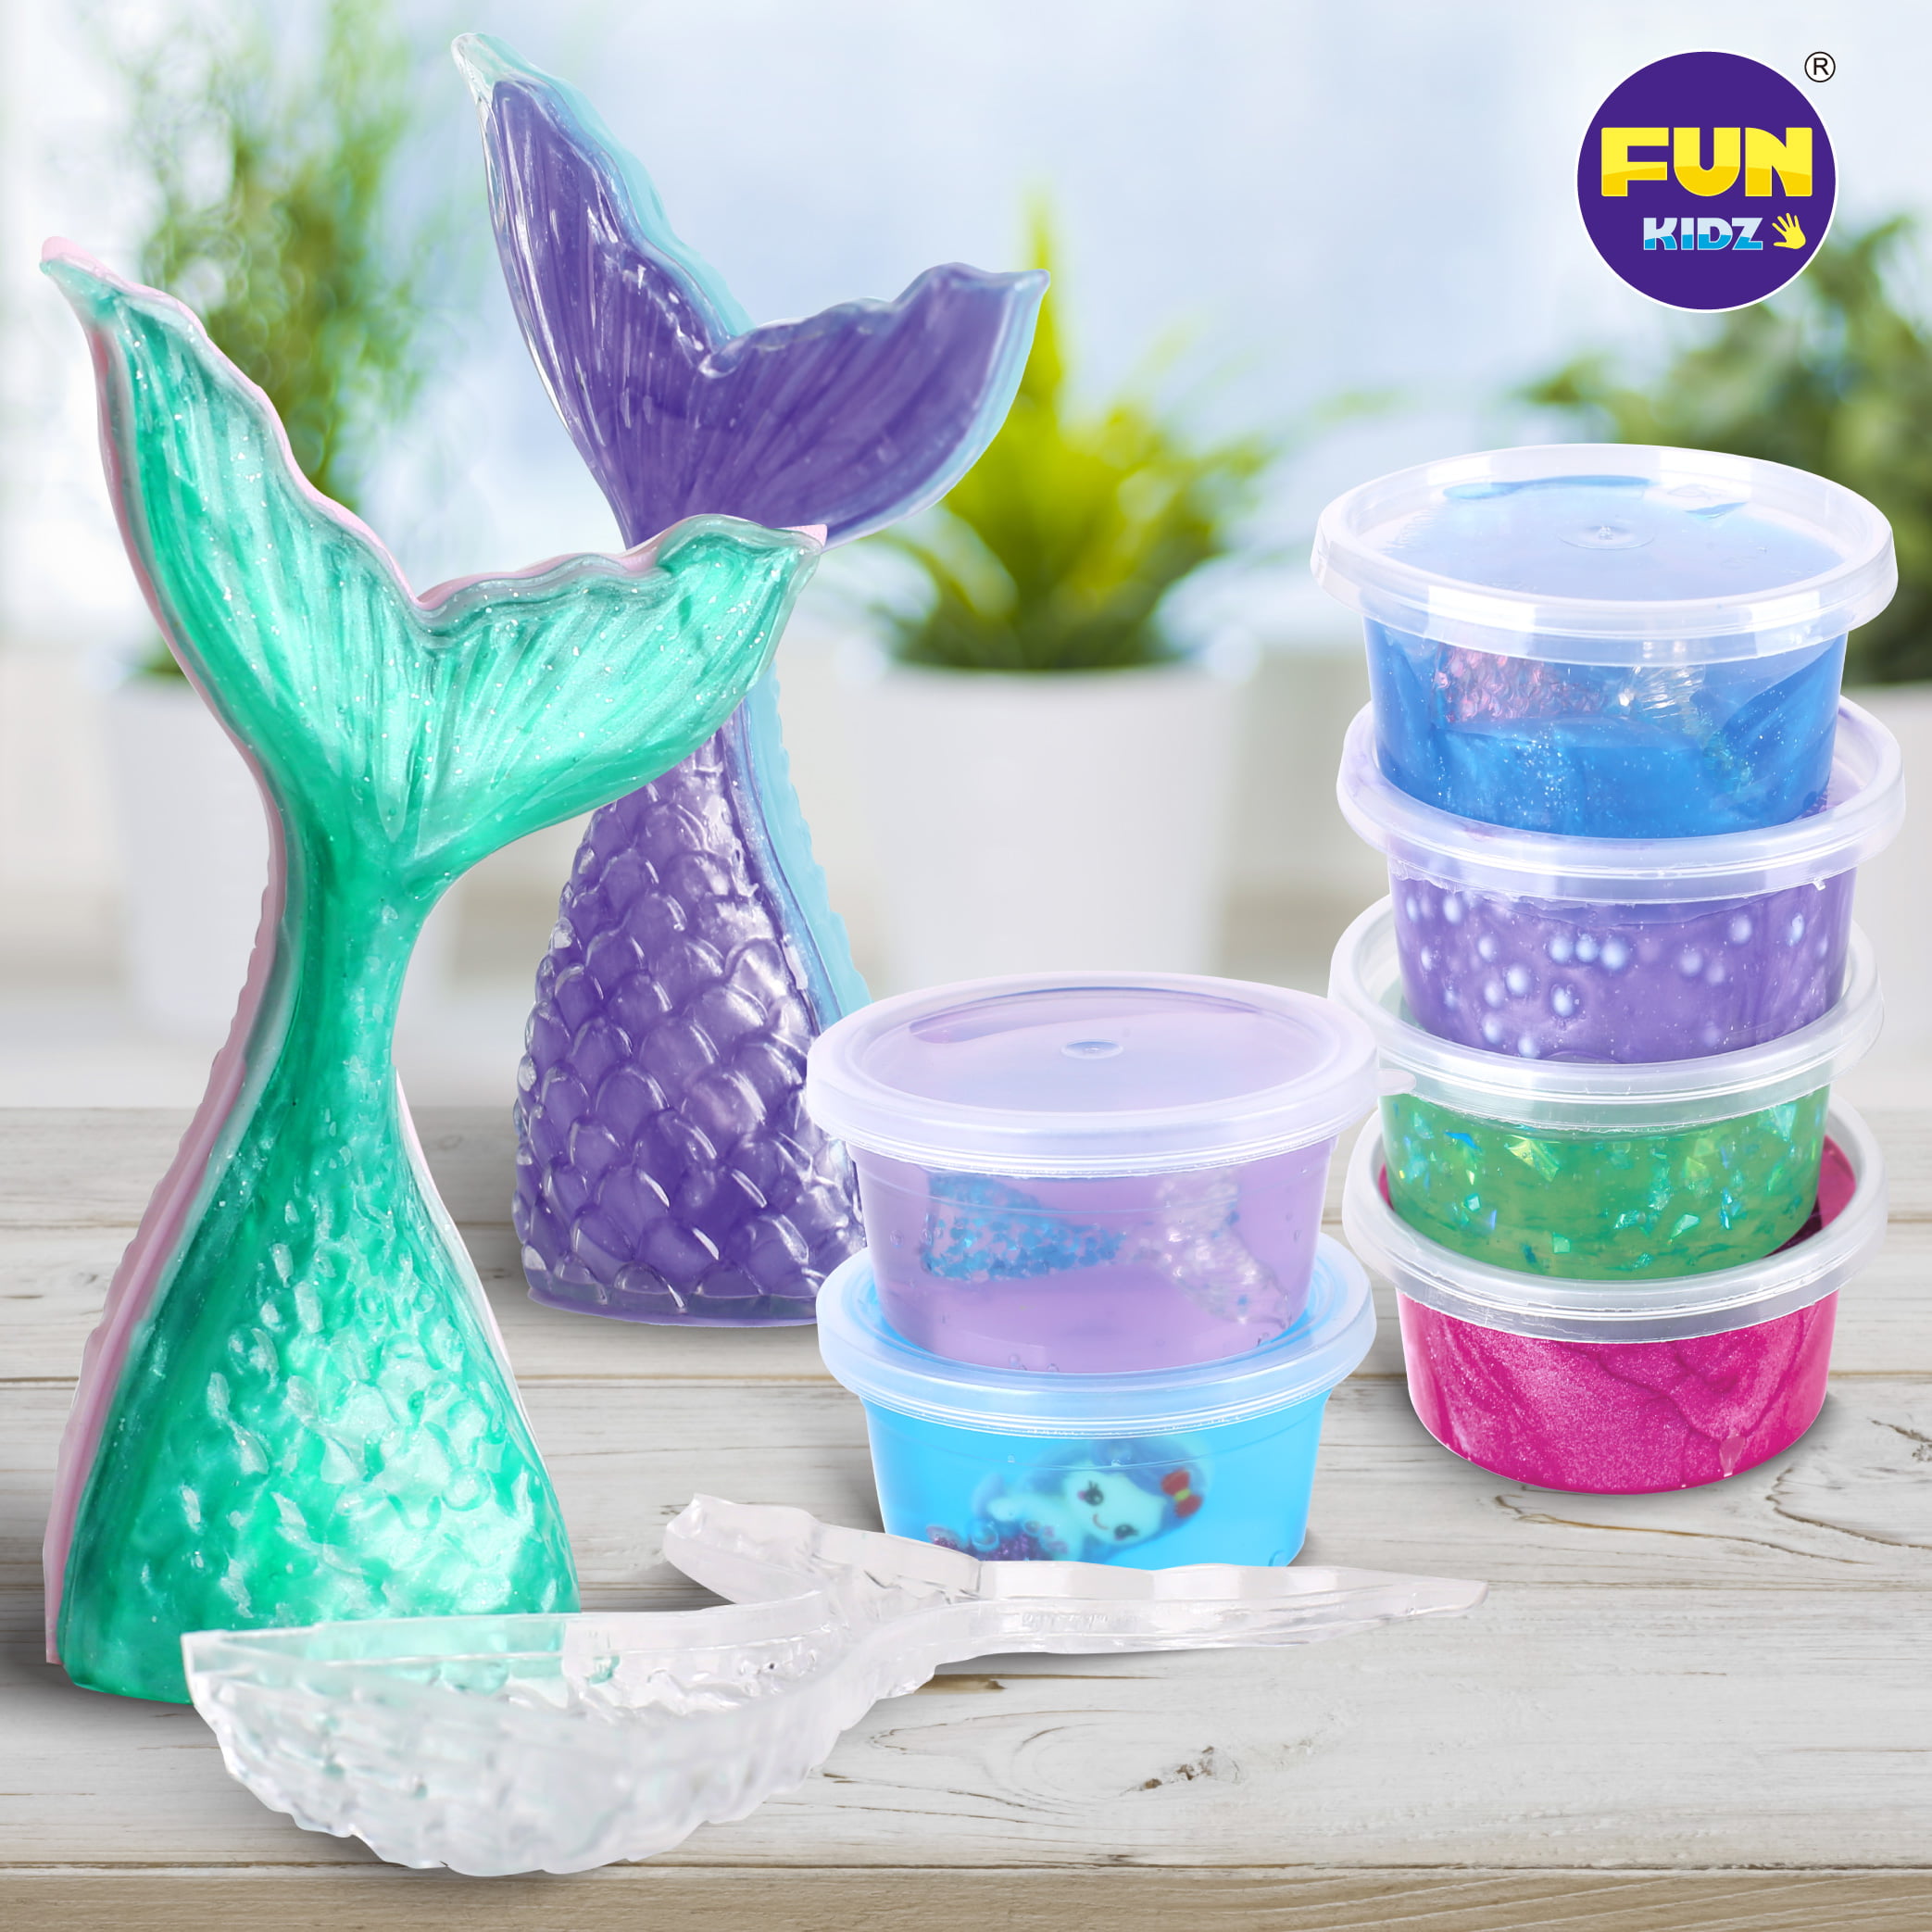 AZRtoys Slime Charms Mud - Beautiful Mermaid Tail Charms Mixing